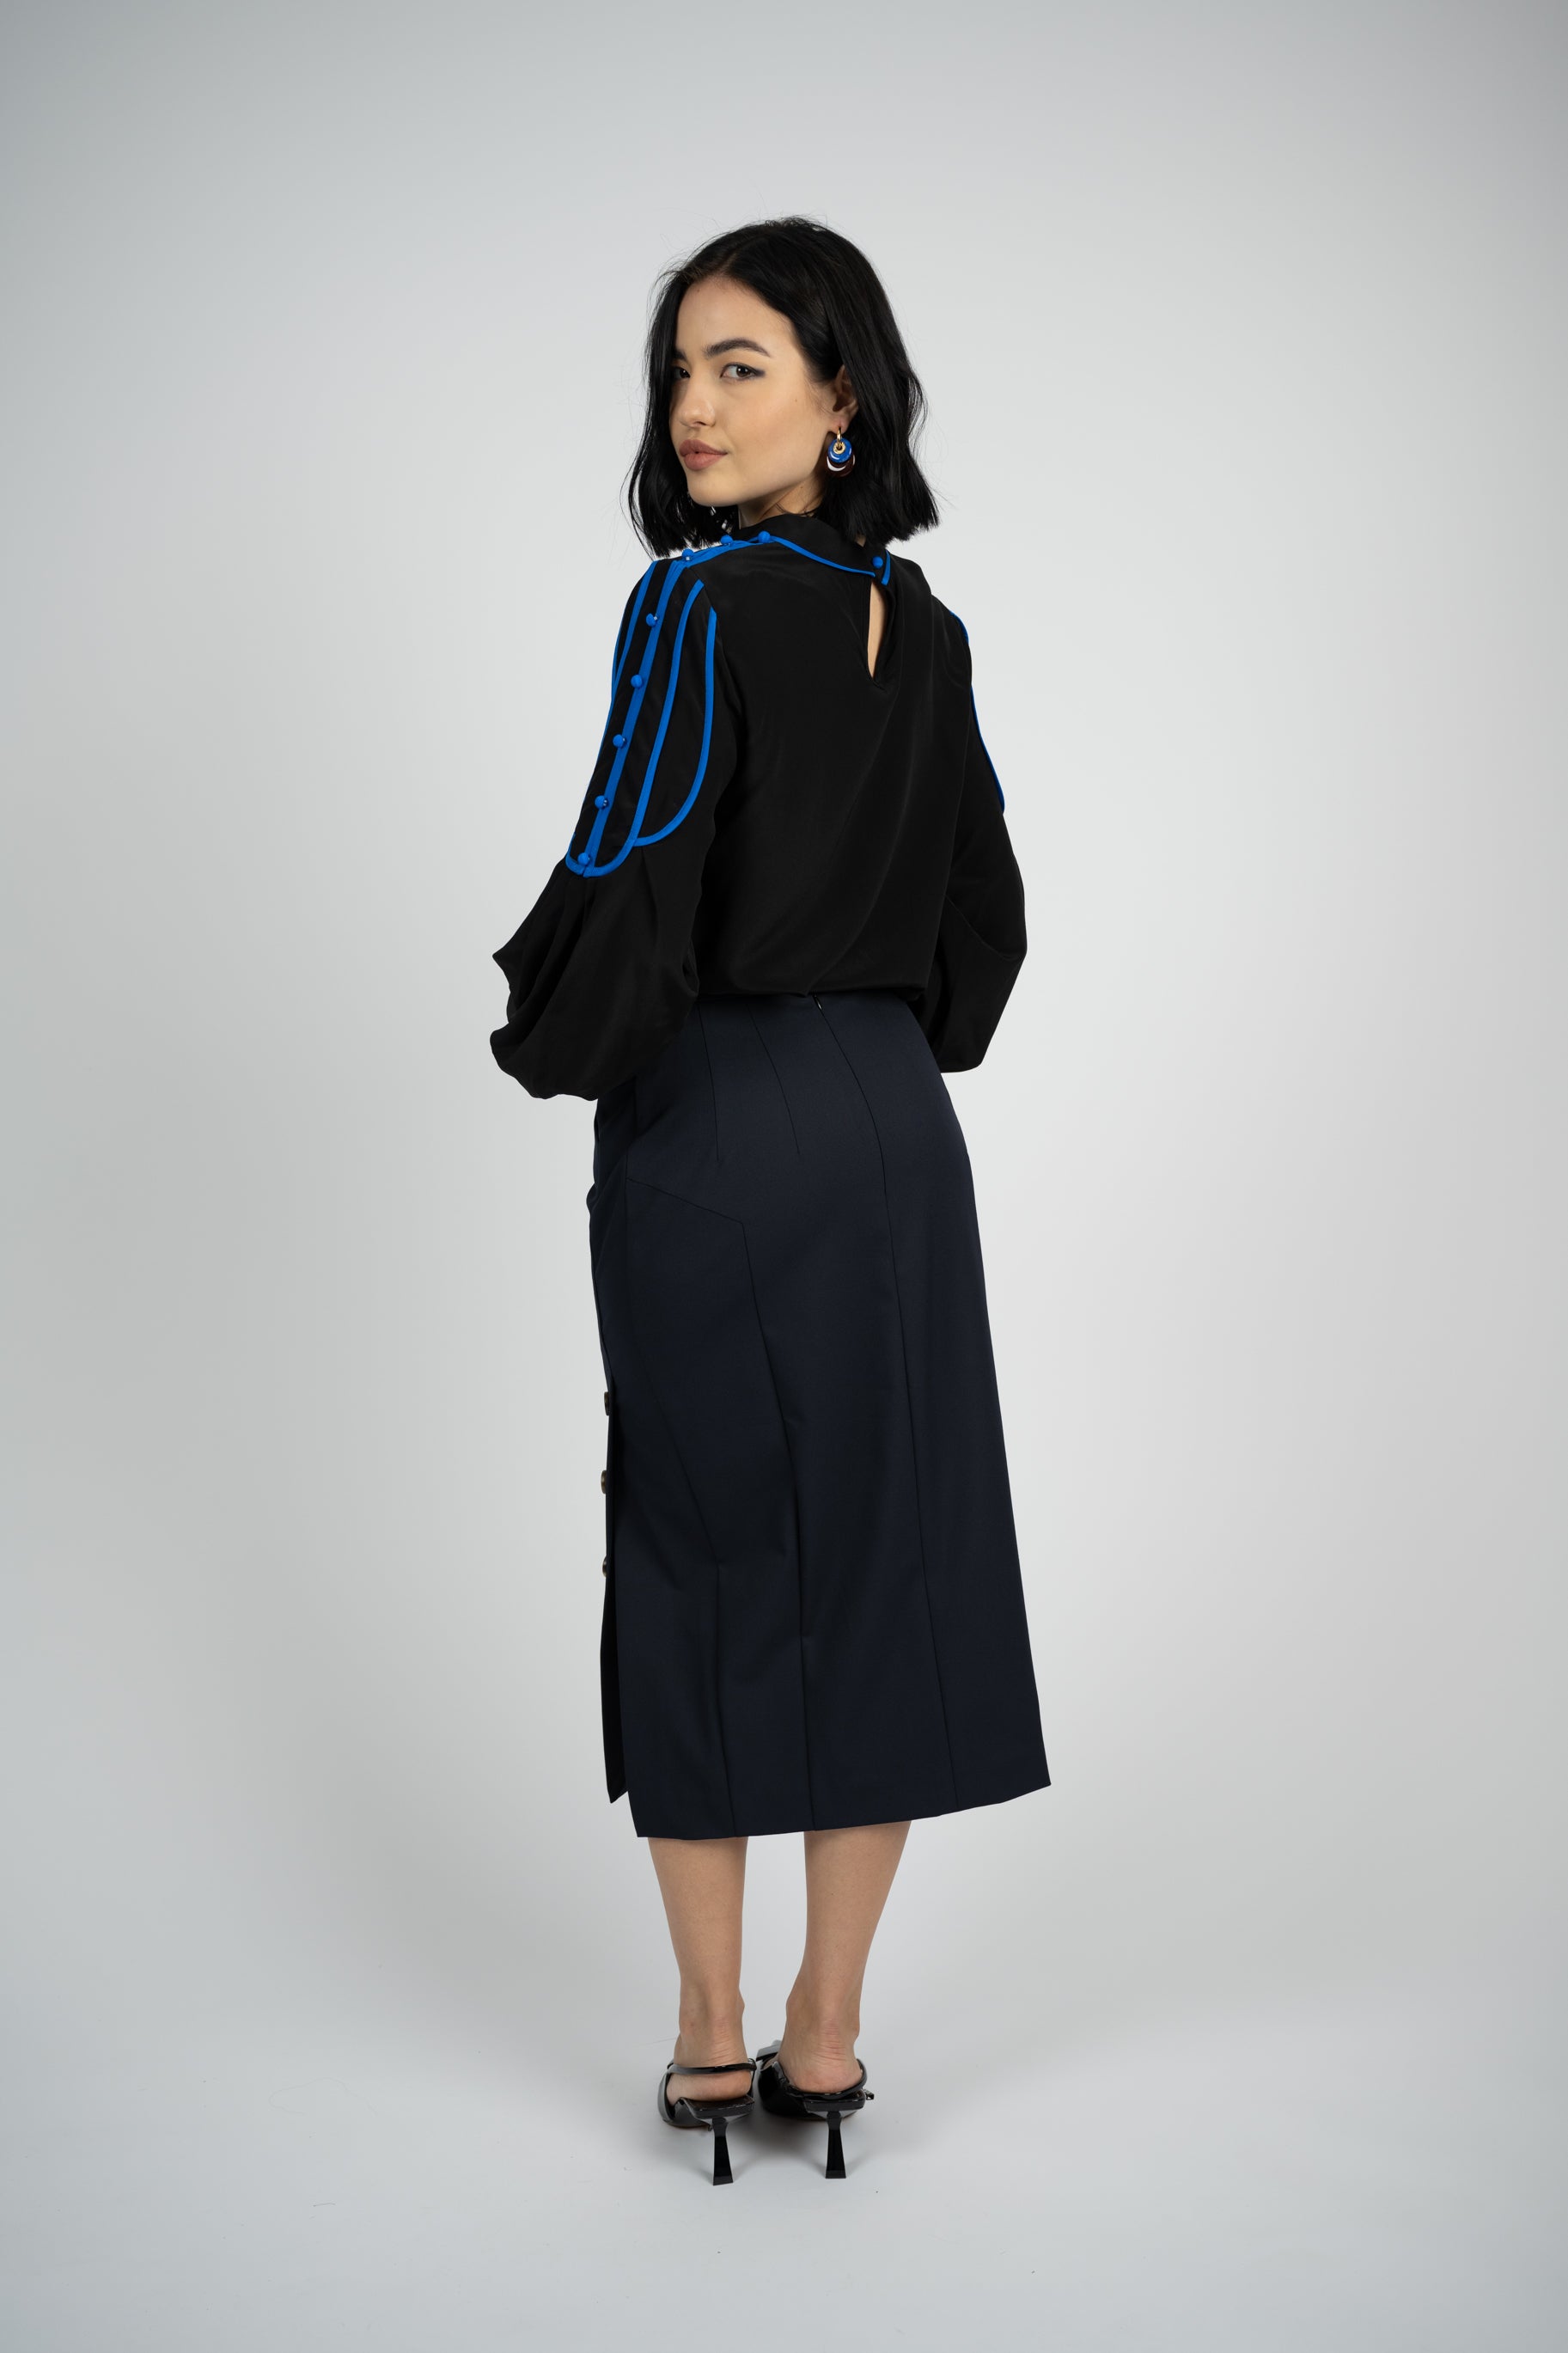 Shop the Latest BIANKA Button Skirt in Black